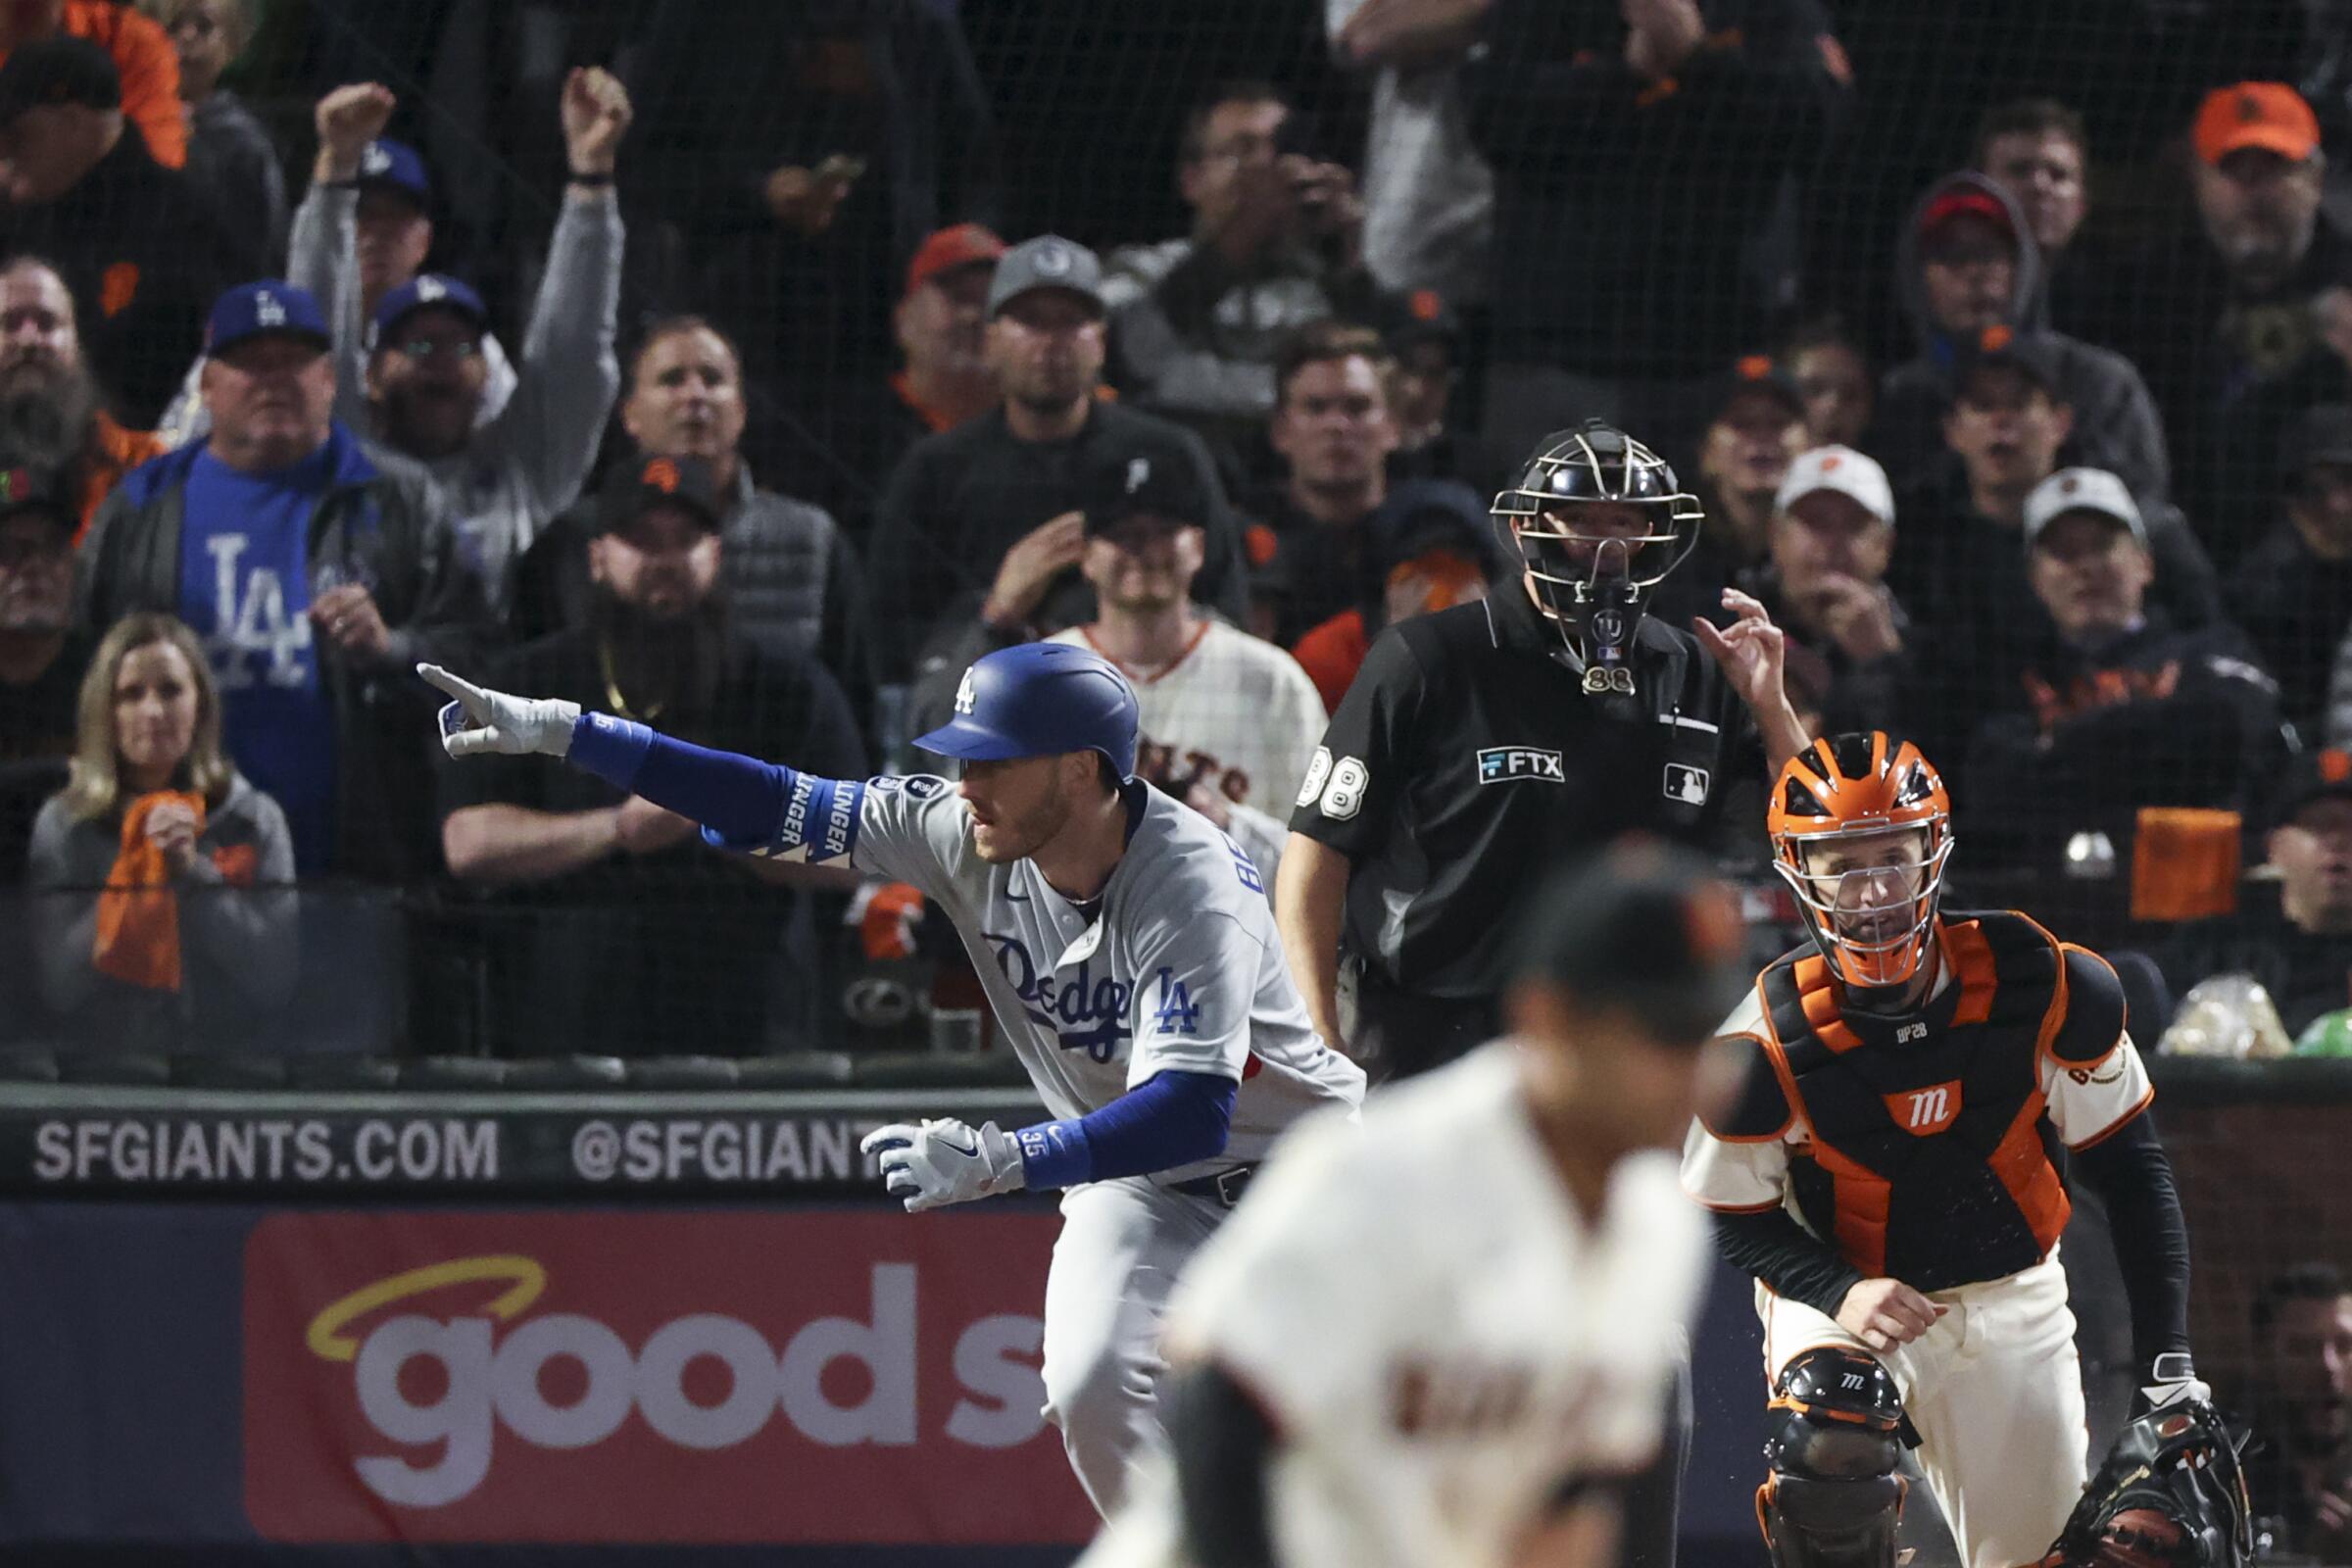 Cody Bellinger embraces redemption opportunity with game-winning hit for  Dodgers in NLDS Game 5